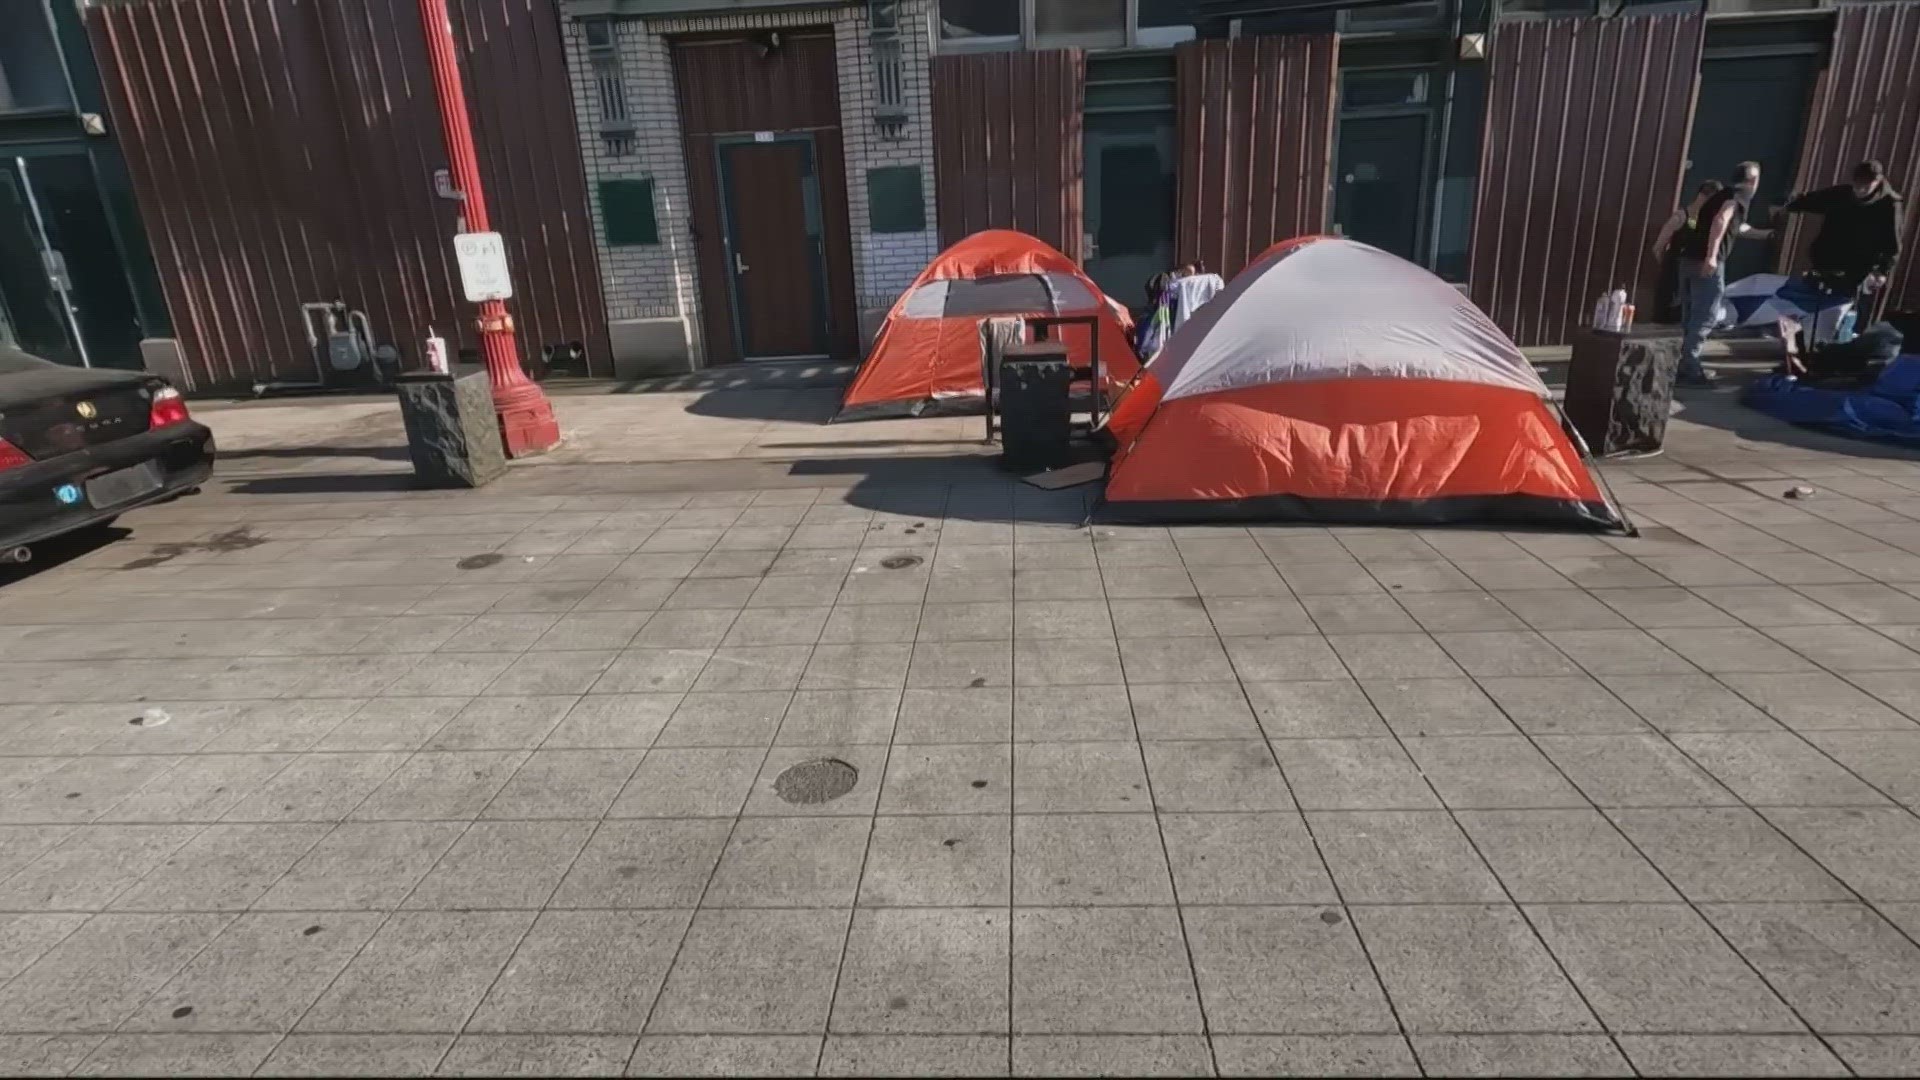 A group of ten residents sued the city in September, arguing that tents and detritus make pedestrian areas impassable for people with mobility disabilities.